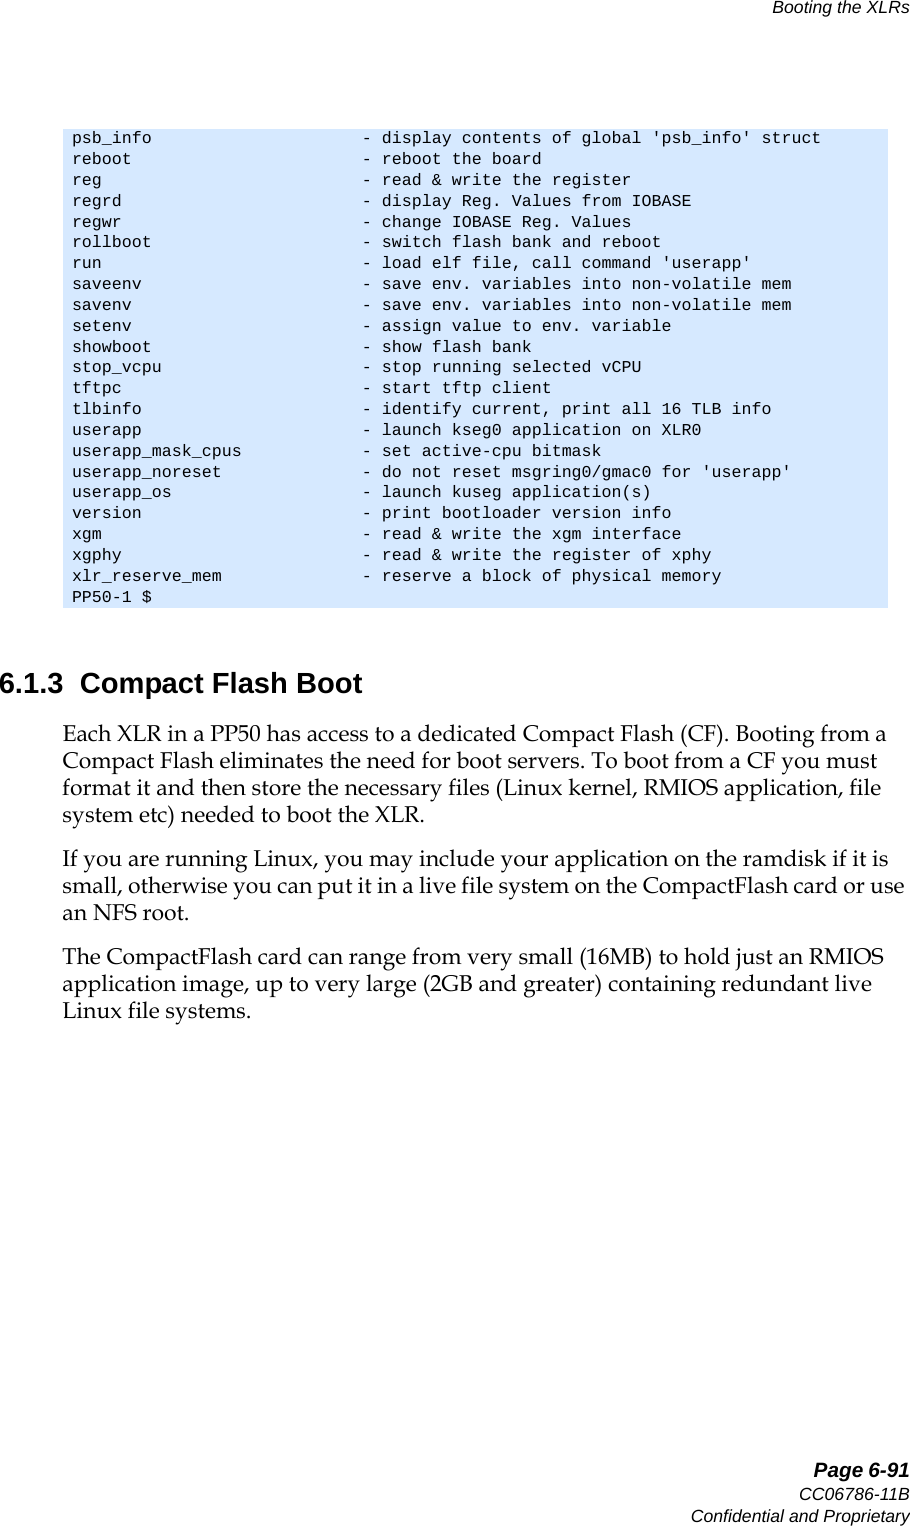   Page 6-91CC06786-11BConfidential and ProprietaryBooting the XLRs14ABABPreliminary6.1.3  Compact Flash BootEach XLR in a PP50 has access to a dedicated Compact Flash (CF). Booting from a Compact Flash eliminates the need for boot servers. To boot from a CF you must format it and then store the necessary files (Linux kernel, RMIOS application, file system etc) needed to boot the XLR. If you are running Linux, you may include your application on the ramdisk if it is small, otherwise you can put it in a live file system on the CompactFlash card or use an NFS root.The CompactFlash card can range from very small (16MB) to hold just an RMIOS application image, up to very large (2GB and greater) containing redundant live Linux file systems.psb_info                     - display contents of global &apos;psb_info&apos; structreboot                       - reboot the boardreg                          - read &amp; write the registerregrd                        - display Reg. Values from IOBASEregwr                        - change IOBASE Reg. Valuesrollboot                     - switch flash bank and rebootrun                          - load elf file, call command &apos;userapp&apos;saveenv                      - save env. variables into non-volatile memsavenv                       - save env. variables into non-volatile memsetenv                       - assign value to env. variableshowboot                     - show flash bankstop_vcpu                    - stop running selected vCPUtftpc                        - start tftp clienttlbinfo                      - identify current, print all 16 TLB infouserapp                      - launch kseg0 application on XLR0userapp_mask_cpus            - set active-cpu bitmaskuserapp_noreset              - do not reset msgring0/gmac0 for &apos;userapp&apos;userapp_os                   - launch kuseg application(s)version                      - print bootloader version infoxgm                          - read &amp; write the xgm interfacexgphy                        - read &amp; write the register of xphyxlr_reserve_mem              - reserve a block of physical memoryPP50-1 $